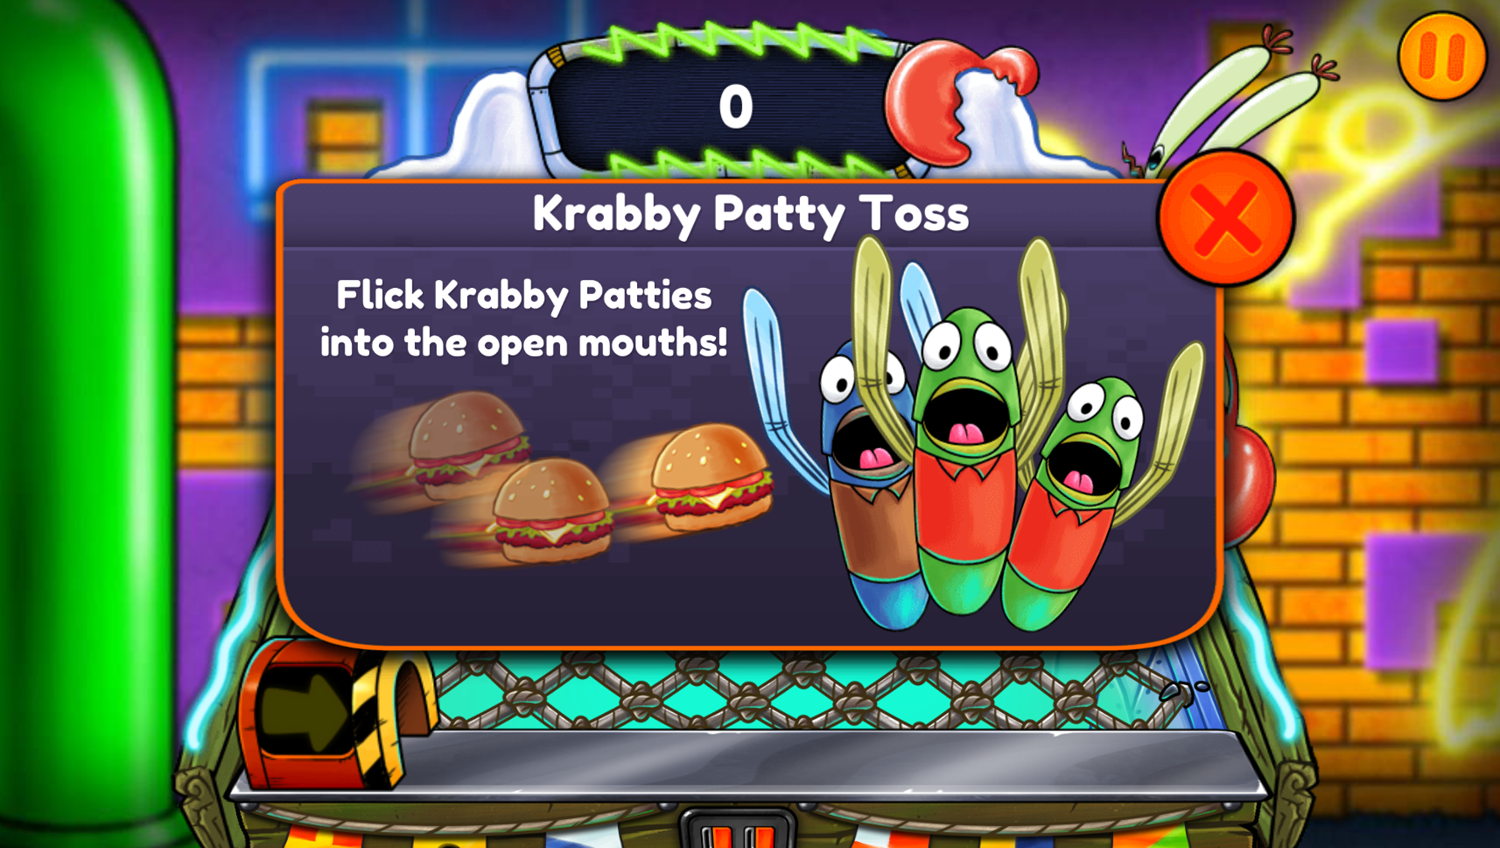 Nick Arcade Game Stage Select Krabby Patty Toss How To Play Screenshot.